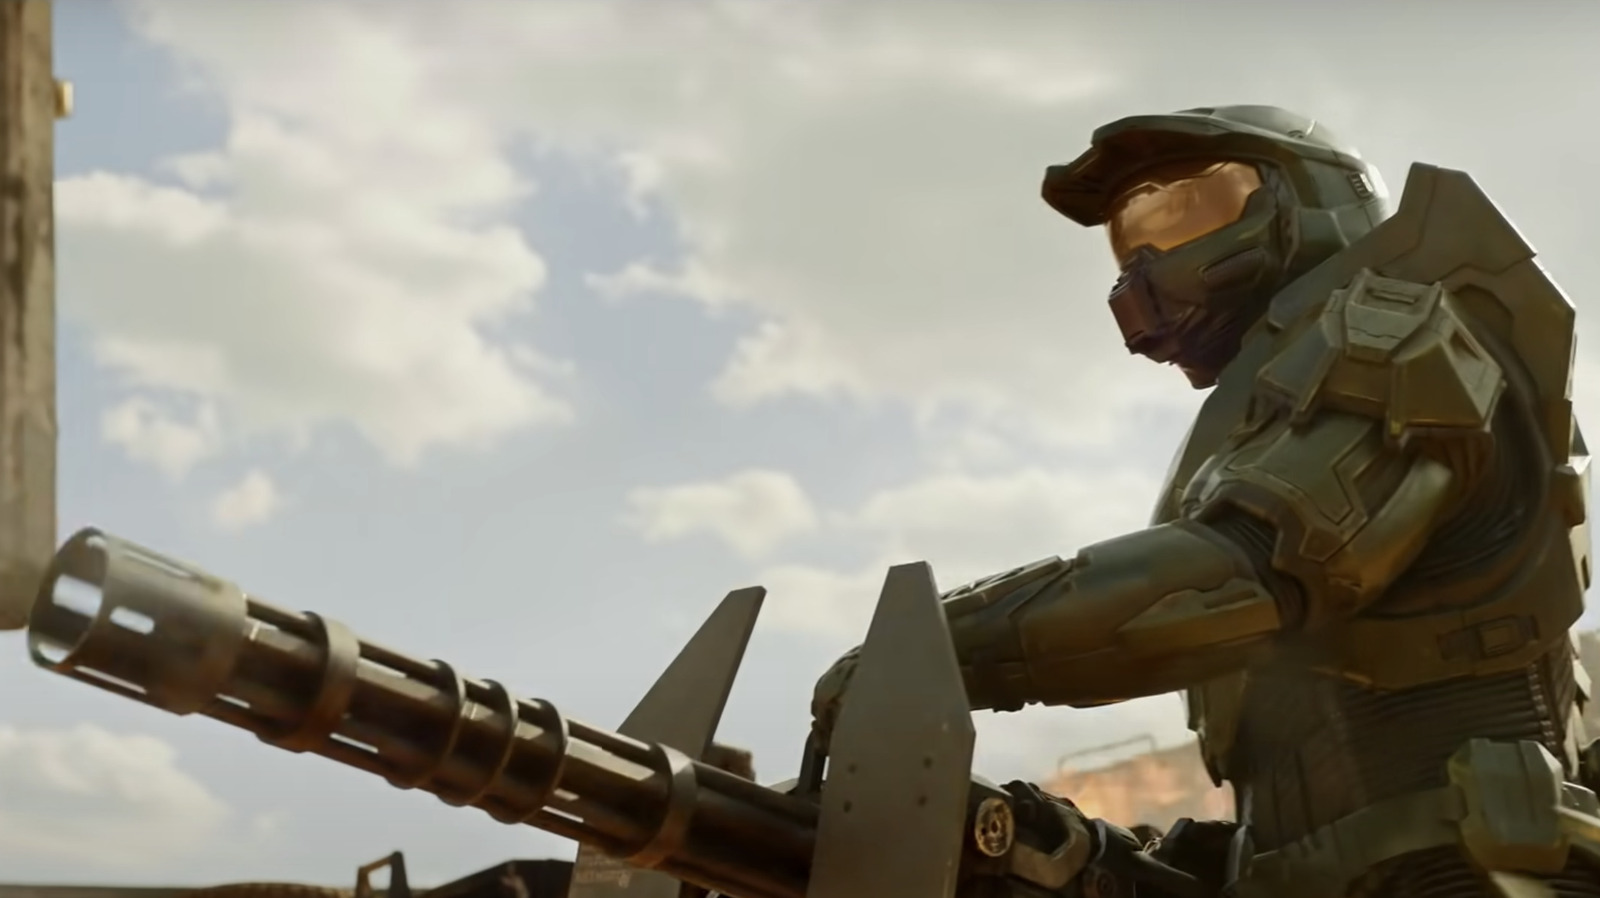 Can Steven Spielberg turn the Halo TV series into the best video game  adaptation yet?